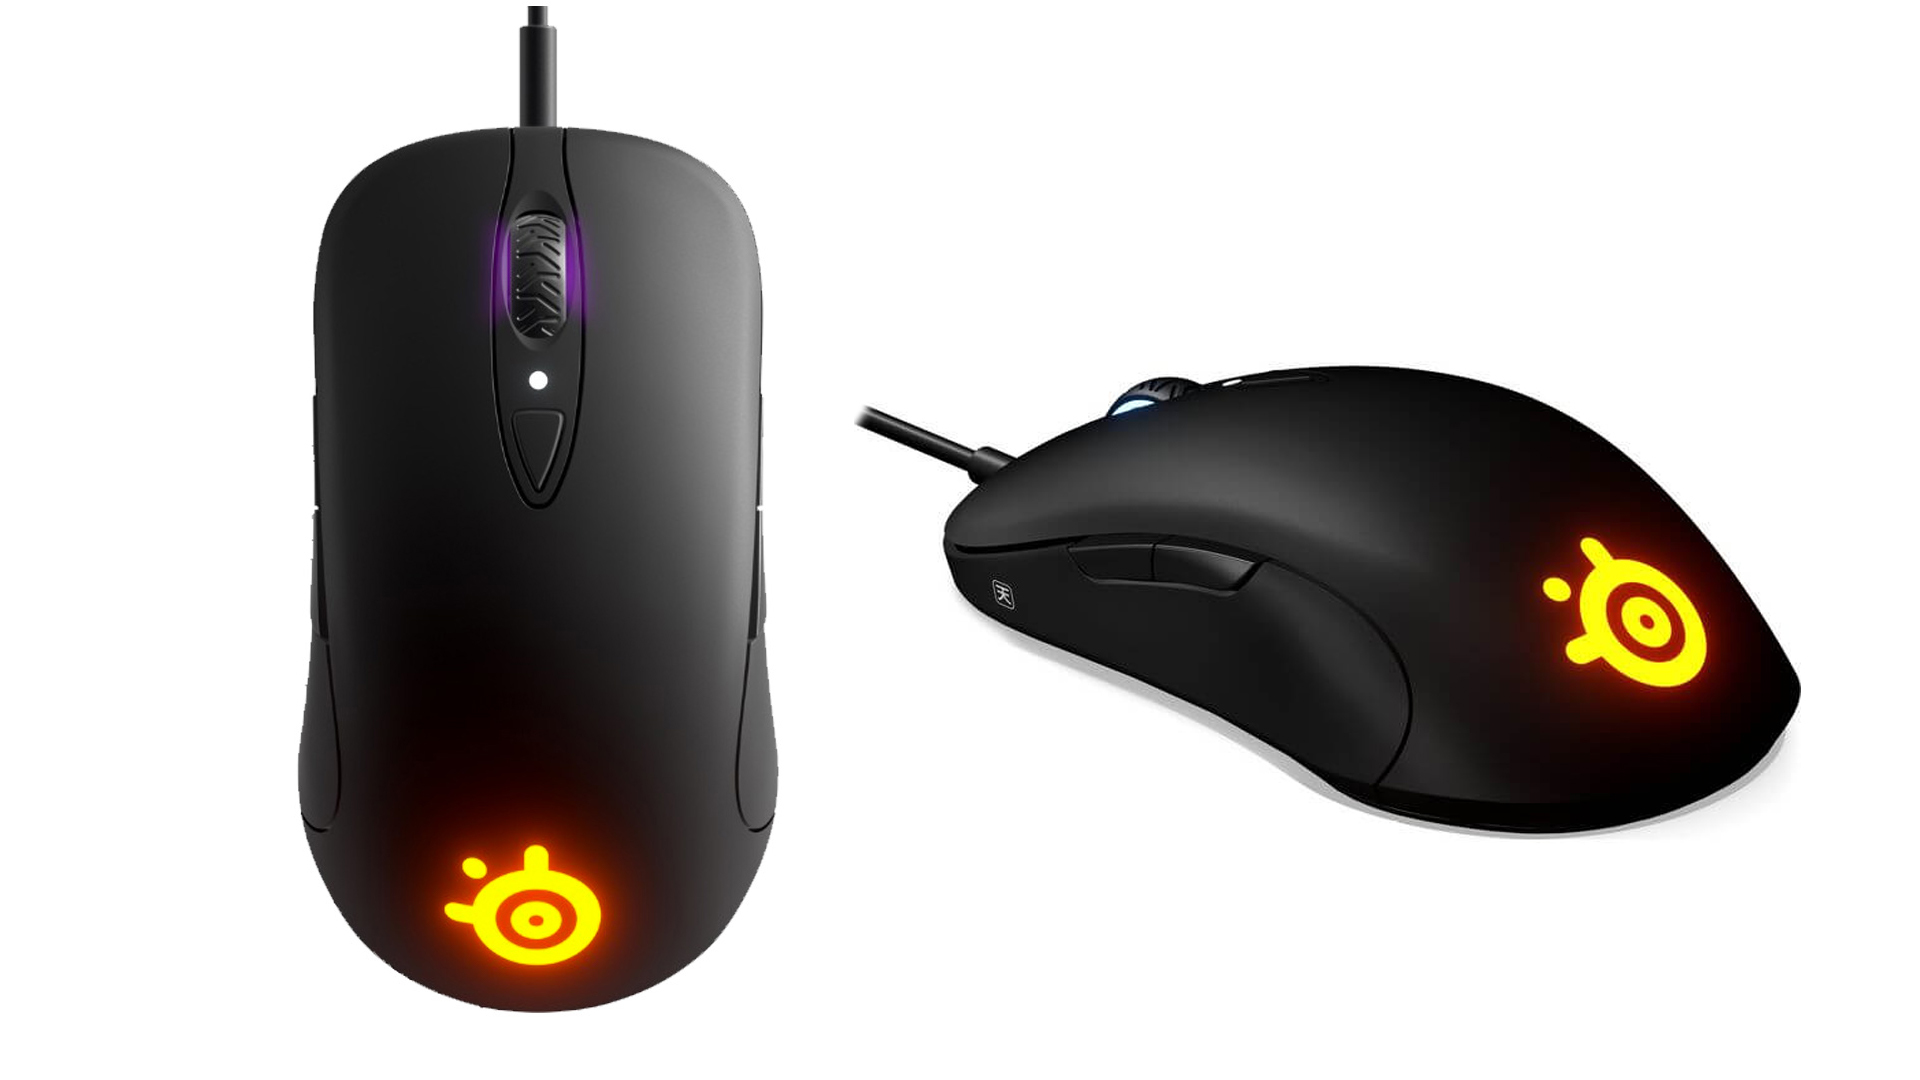 How To Buy A Gaming Mouse Online?